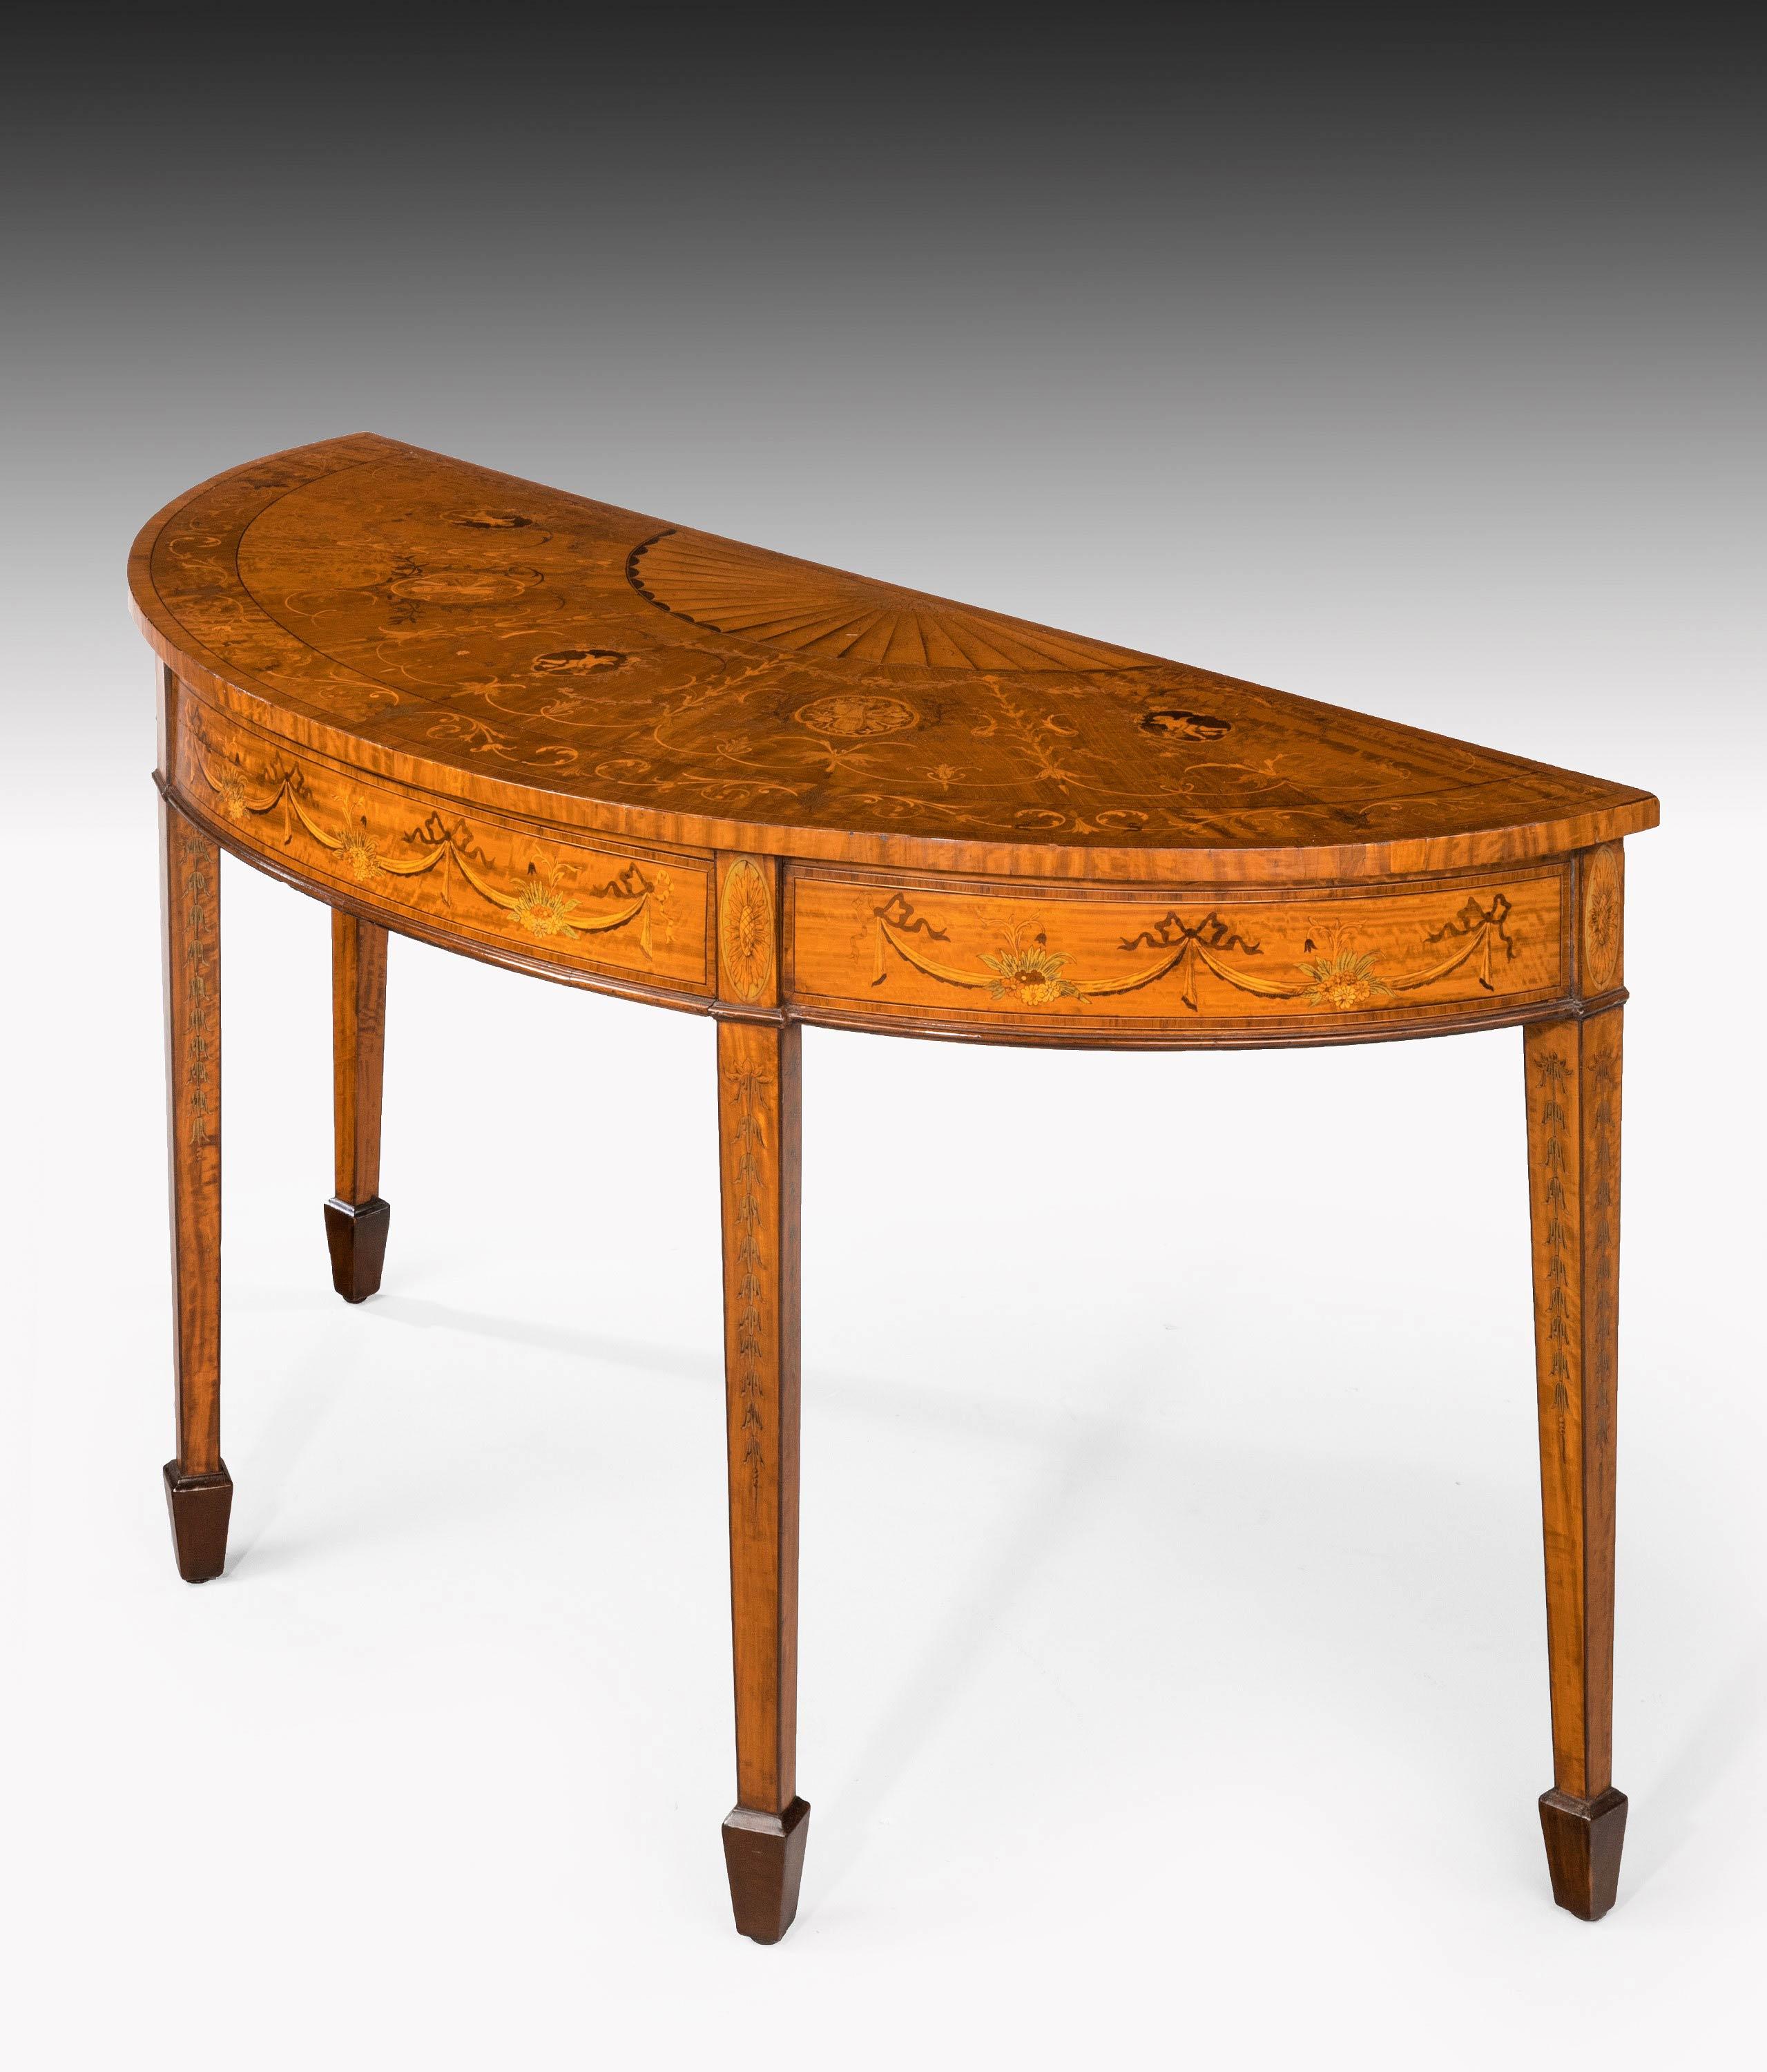 George III Period Mahogany Demilune Pier Table of Complex Form 1